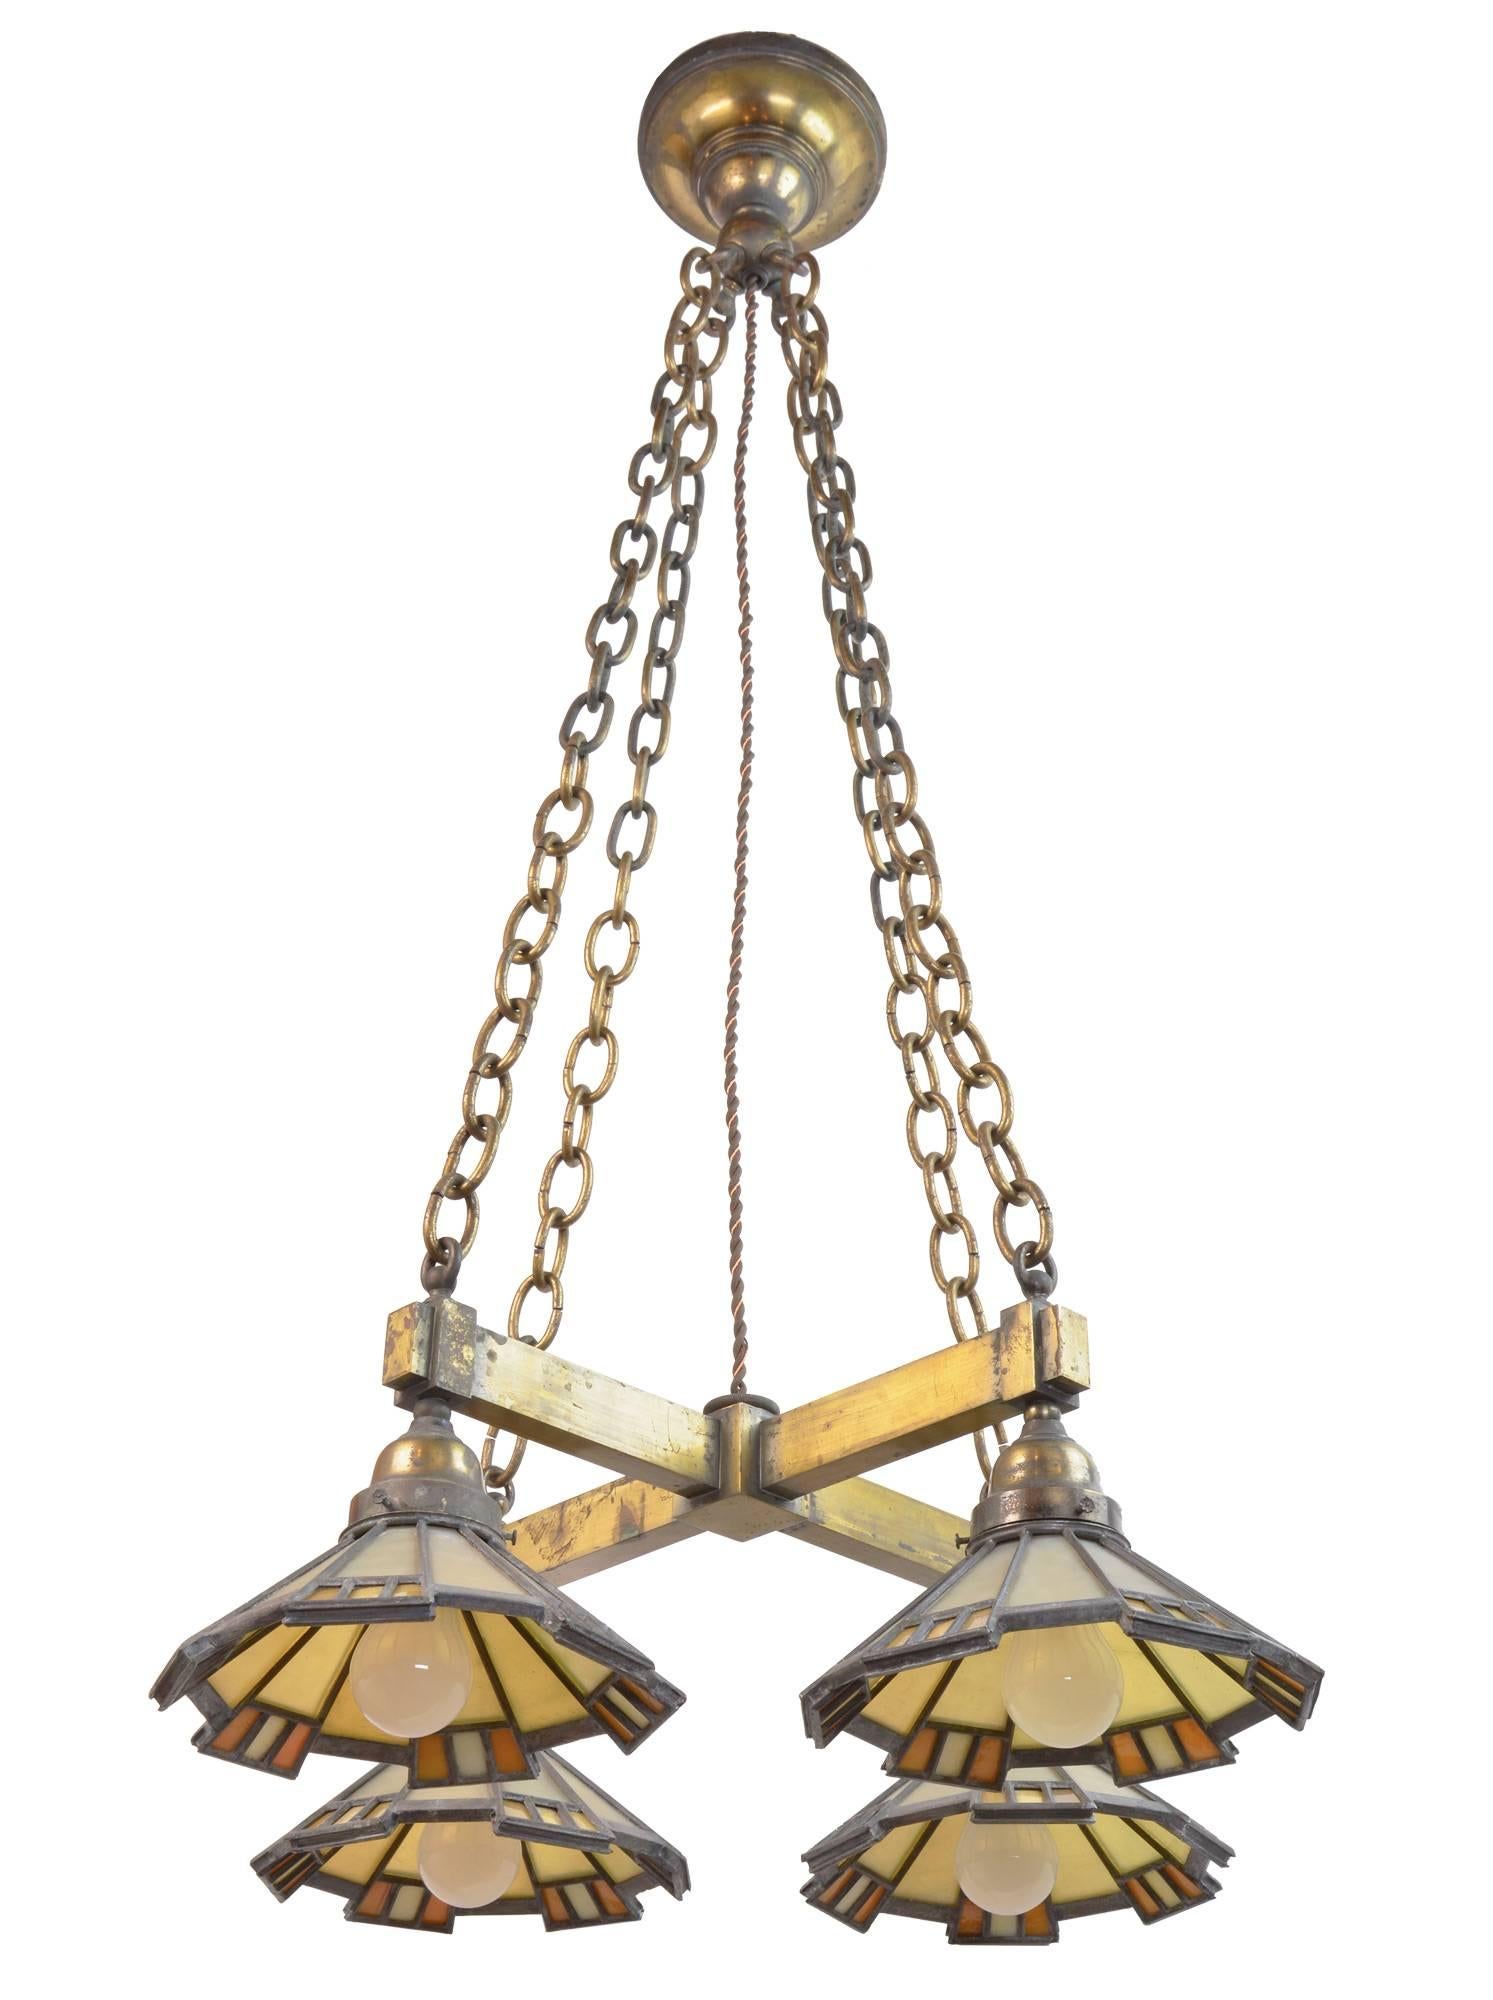 This beautiful and unique brass four-light Mission chandelier has a set of art glass shades in rich tones of amber and yellow glass. Original from sizable home in the Minneapolis area, the iridescent quality of glass and craftsman ship of the